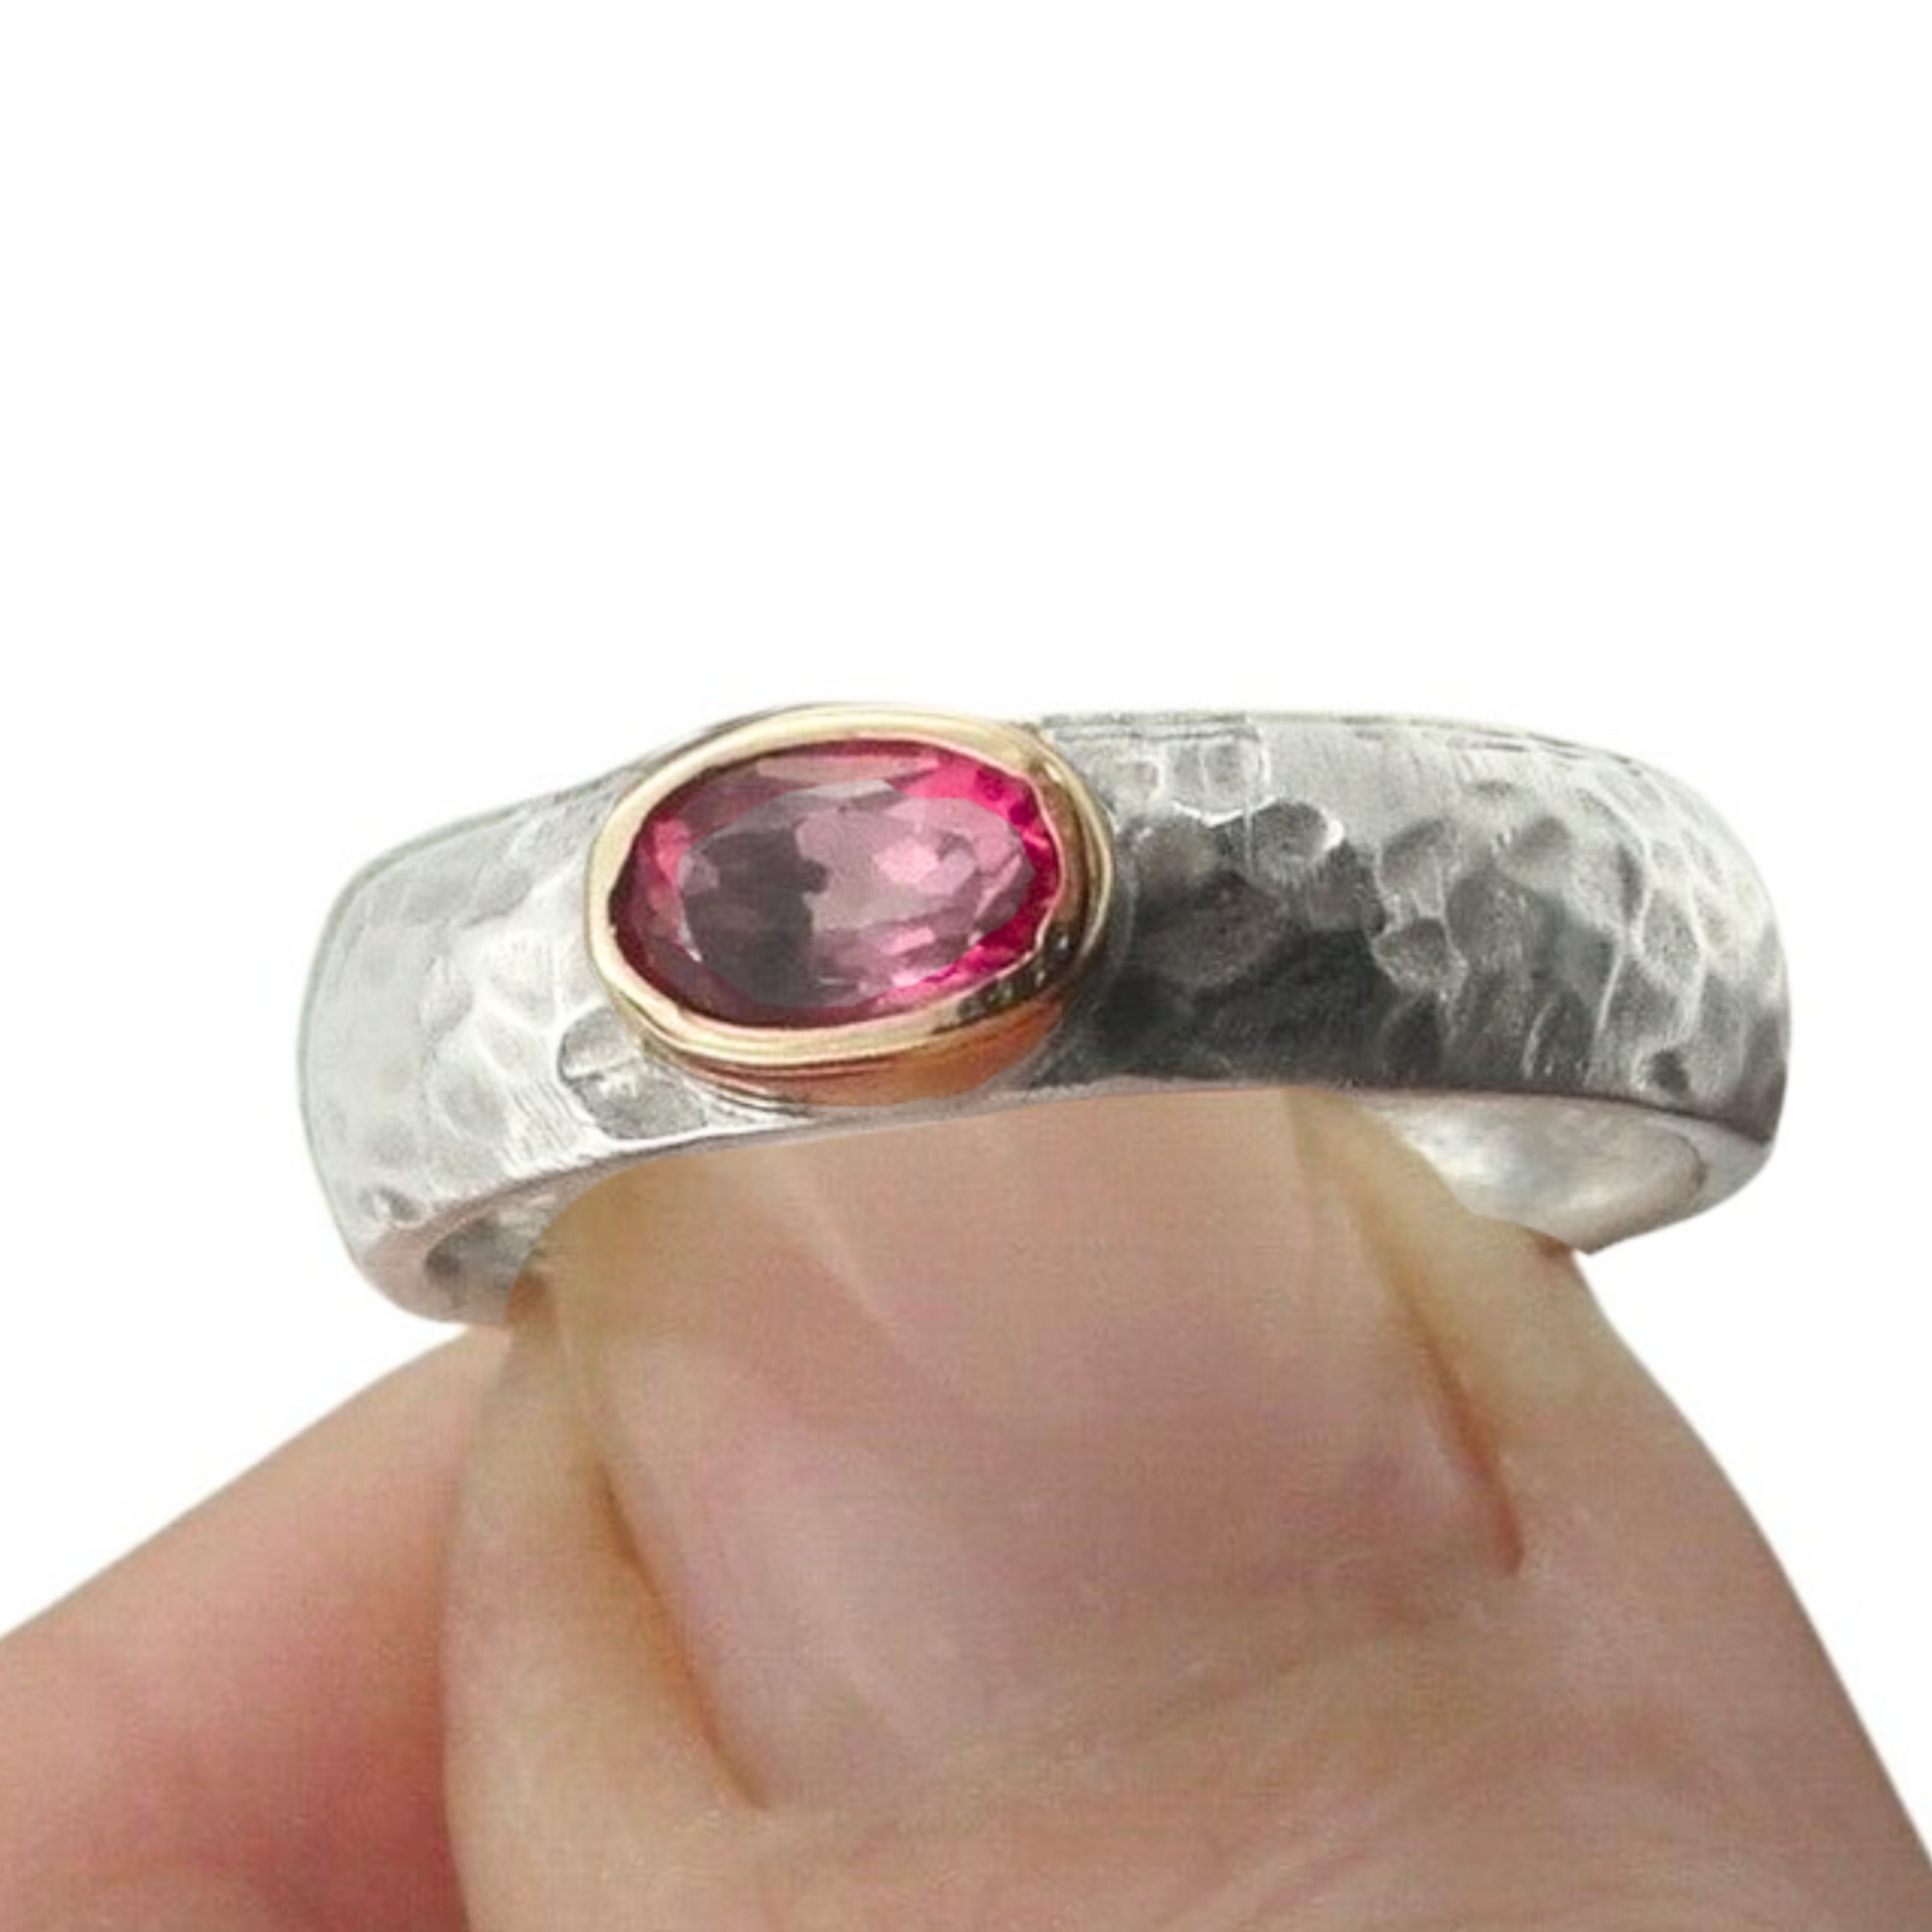 Tourmaline Ring, Pink Tourmaline Sterling Silver Ring With Yellow Gold, Delicate Pink Gemstone, Silver and Gold, Israeli Jewelry